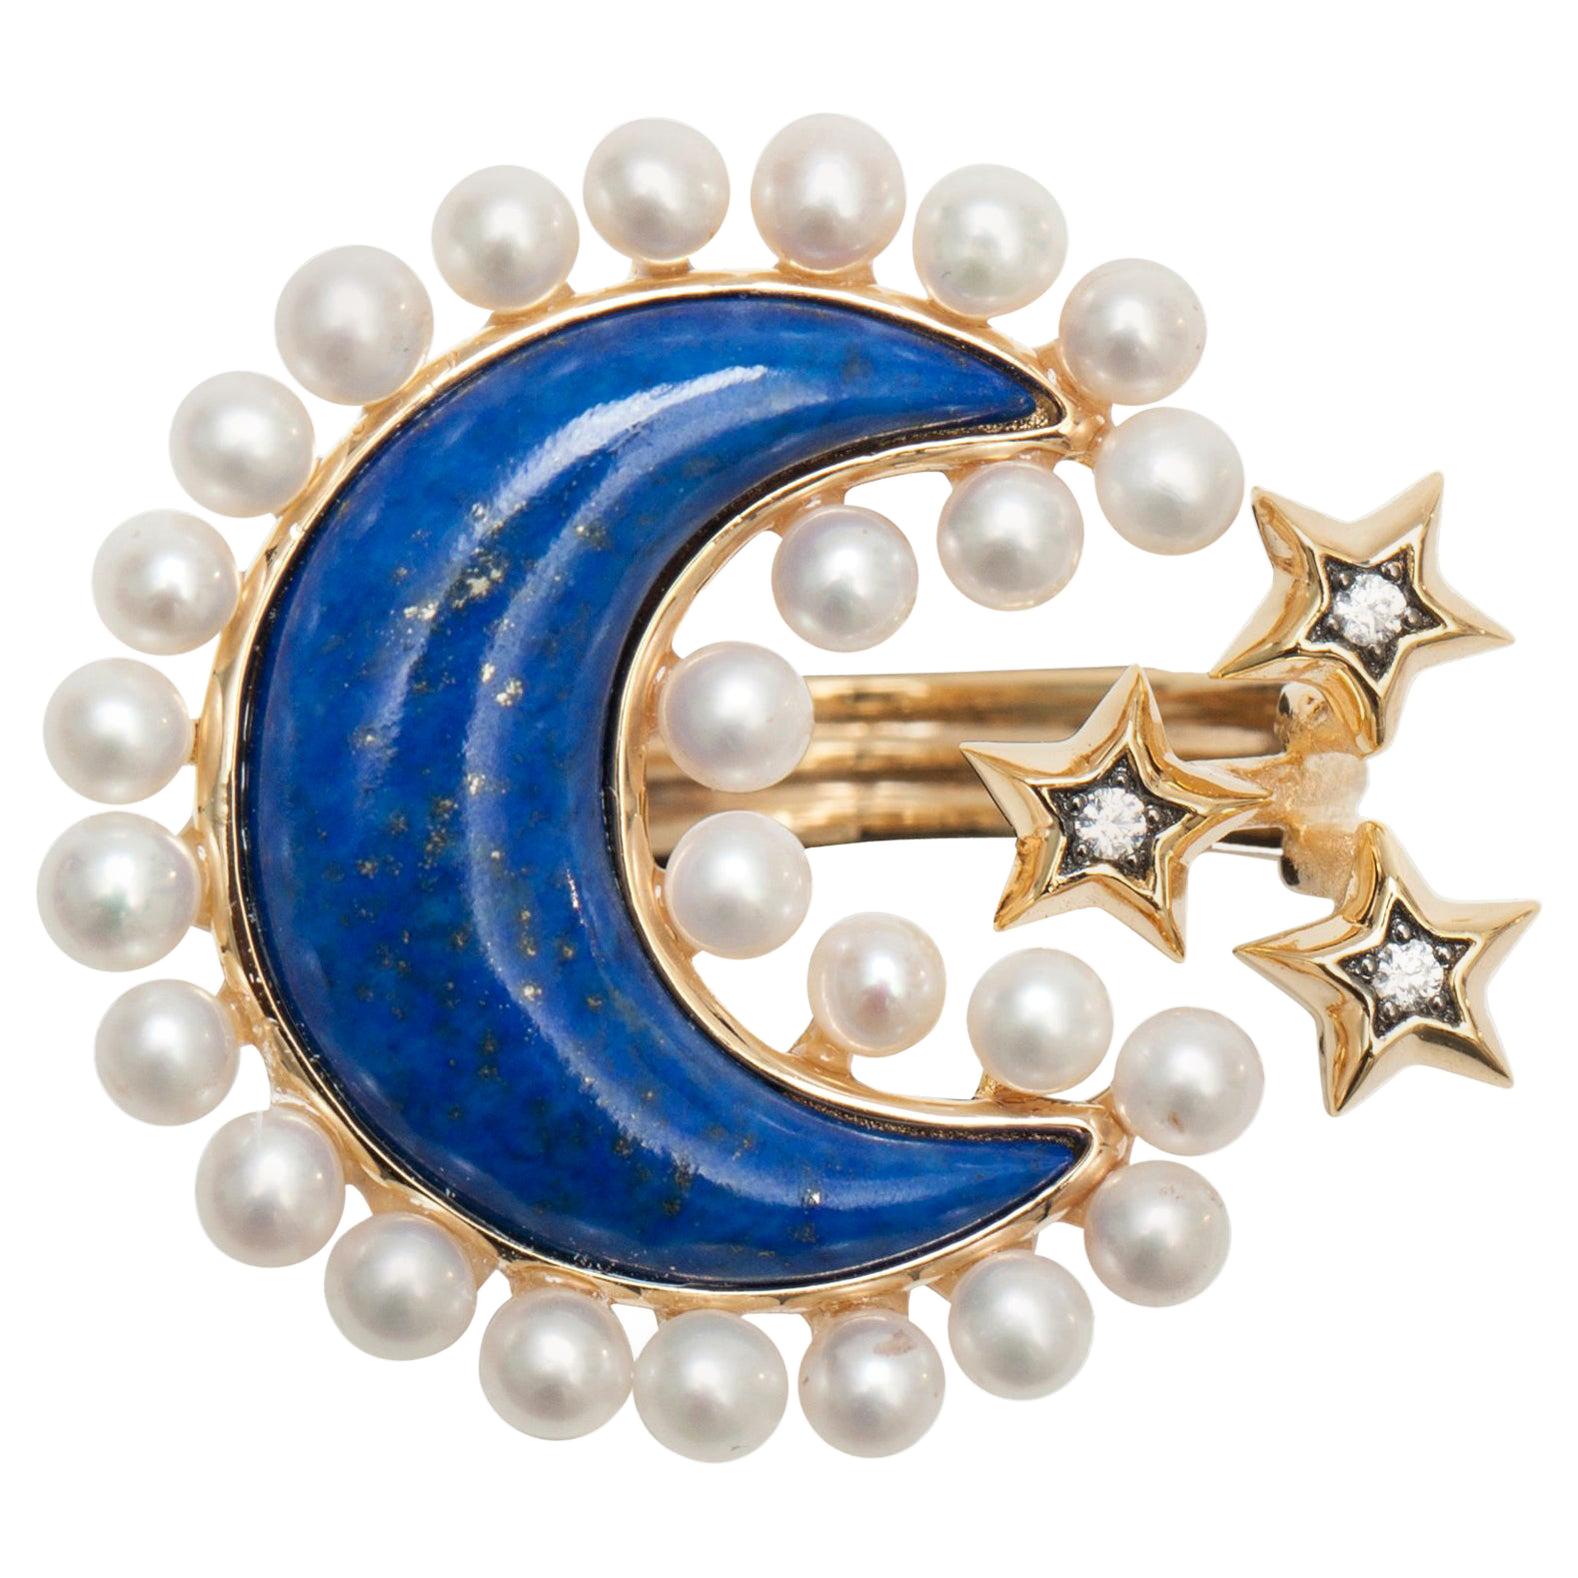 Ammanii Pearls and Lapis Lazuli Moon and Stars Vermeil Cocktail Ring